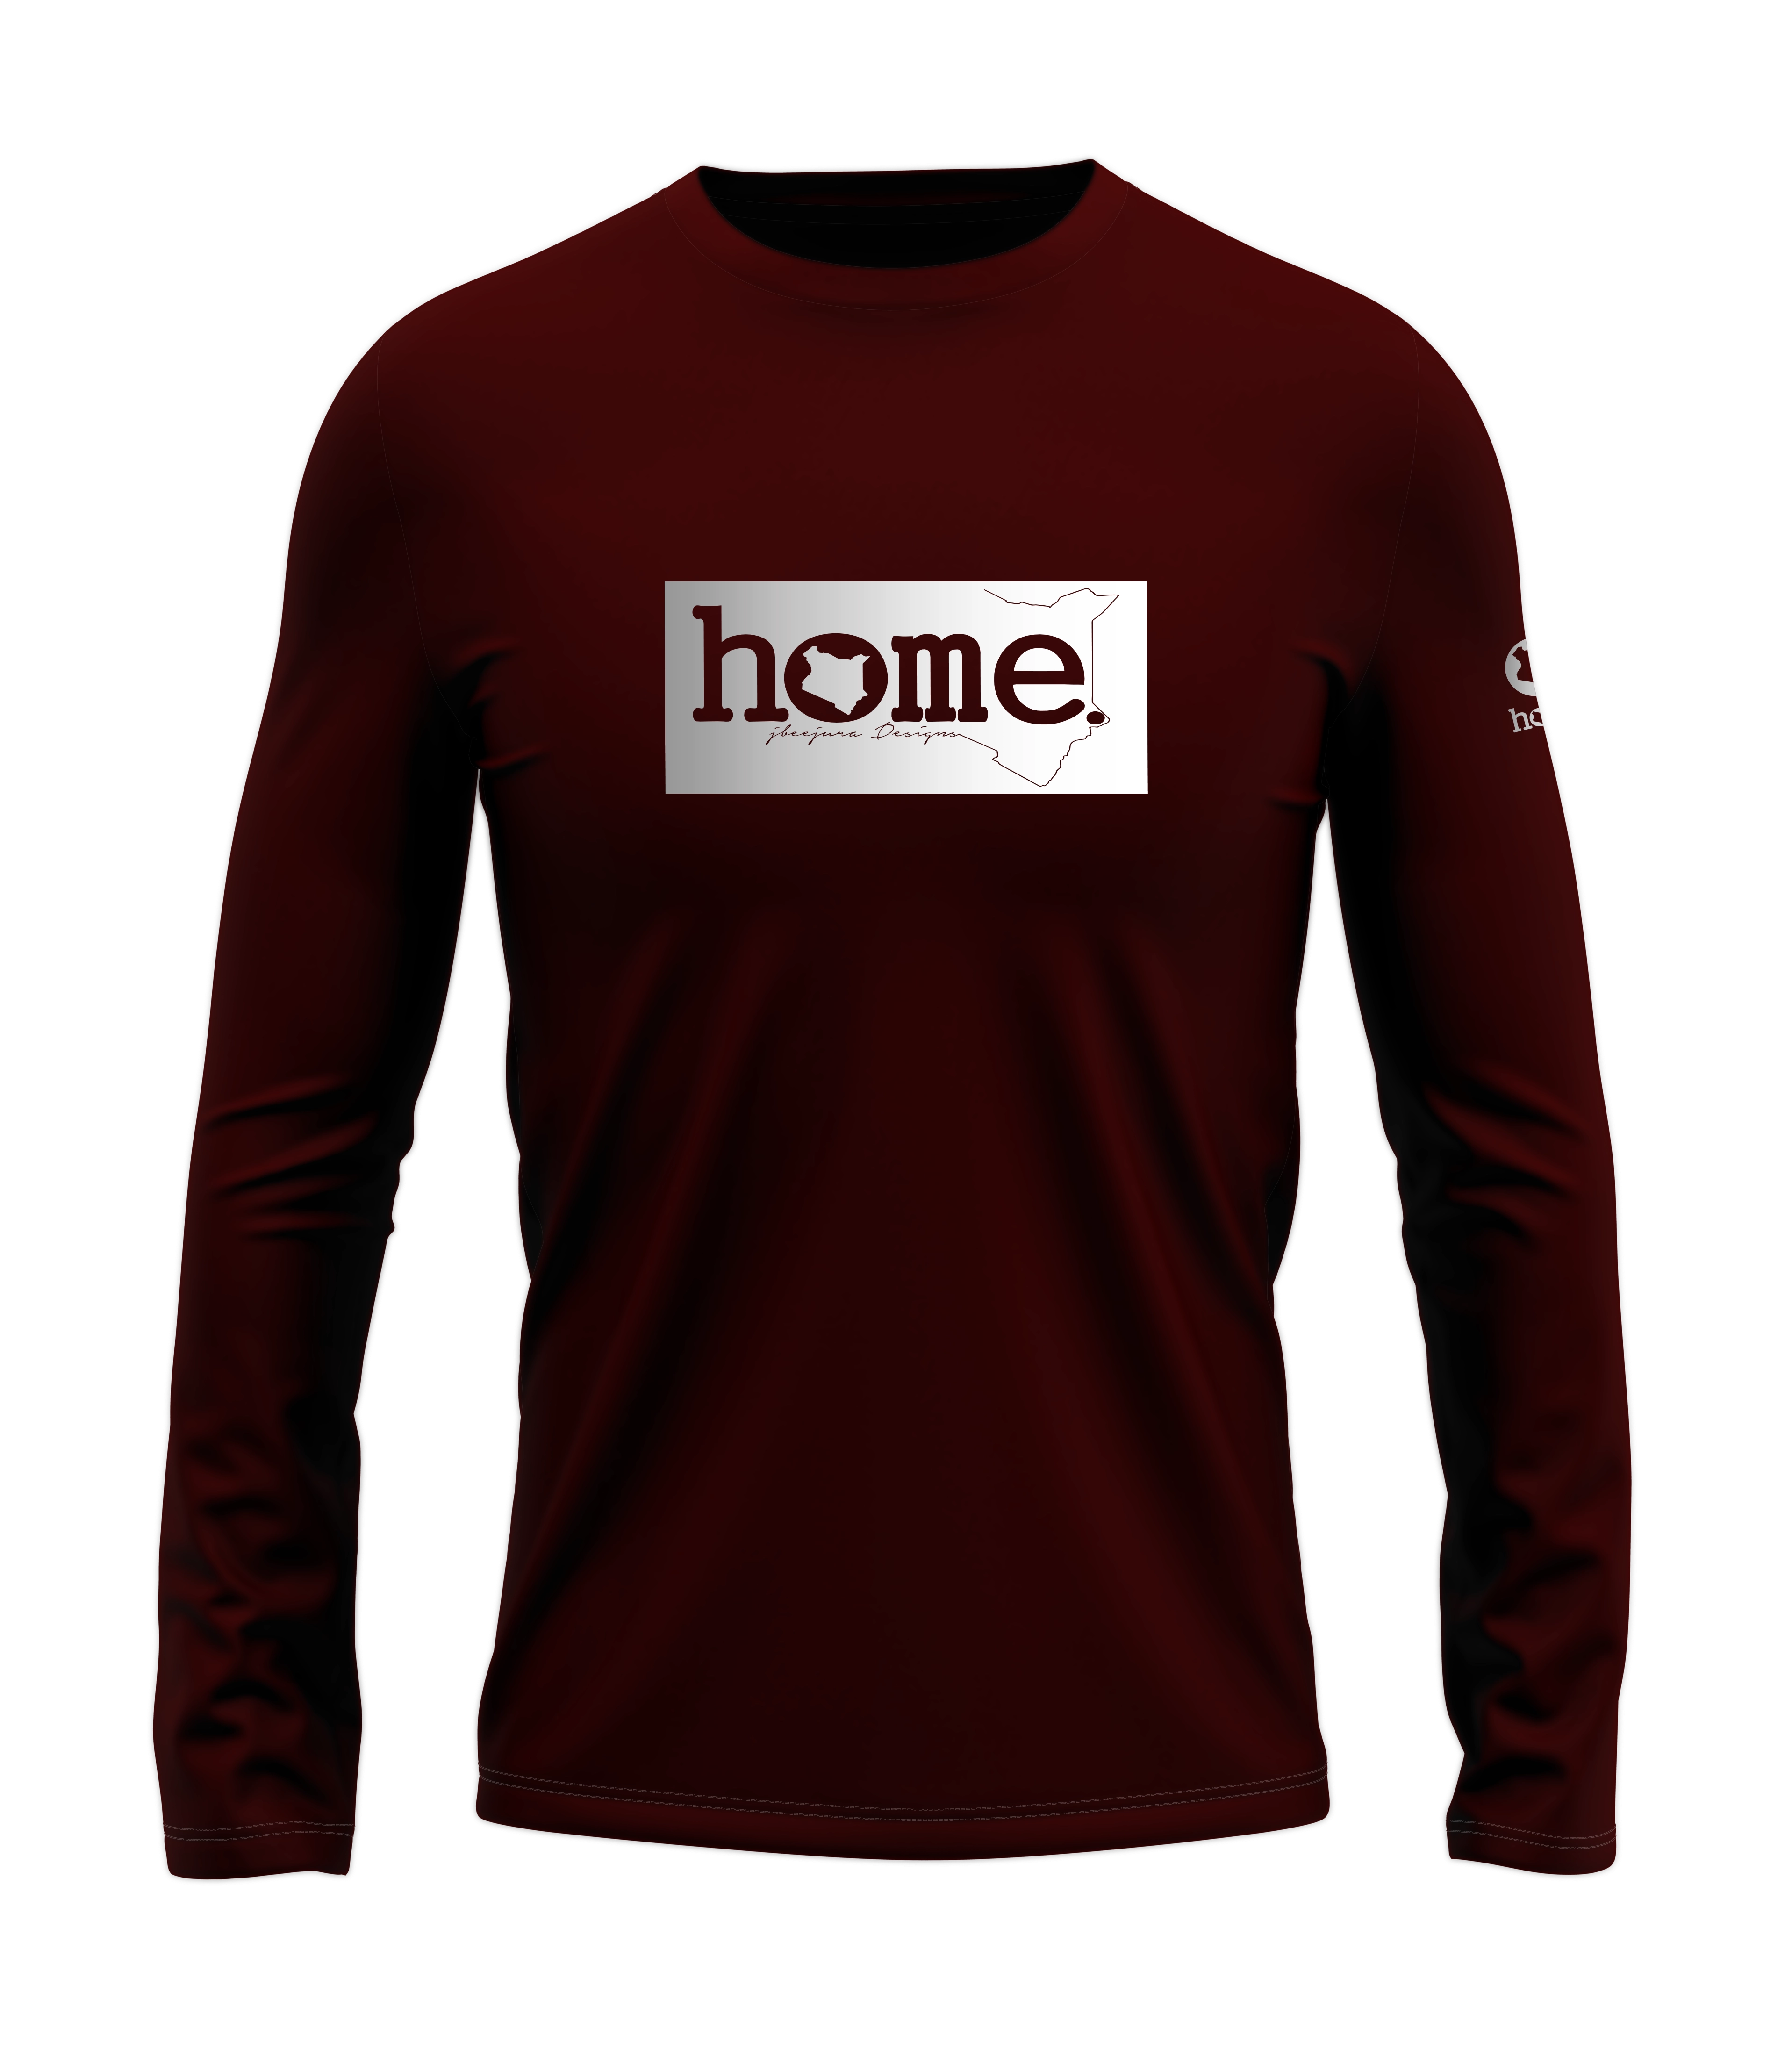 home_254 LONG-SLEEVED MAROON T-SHIRT WITH A SILVER CLASSIC PRINT – COTTON PLUS FABRIC